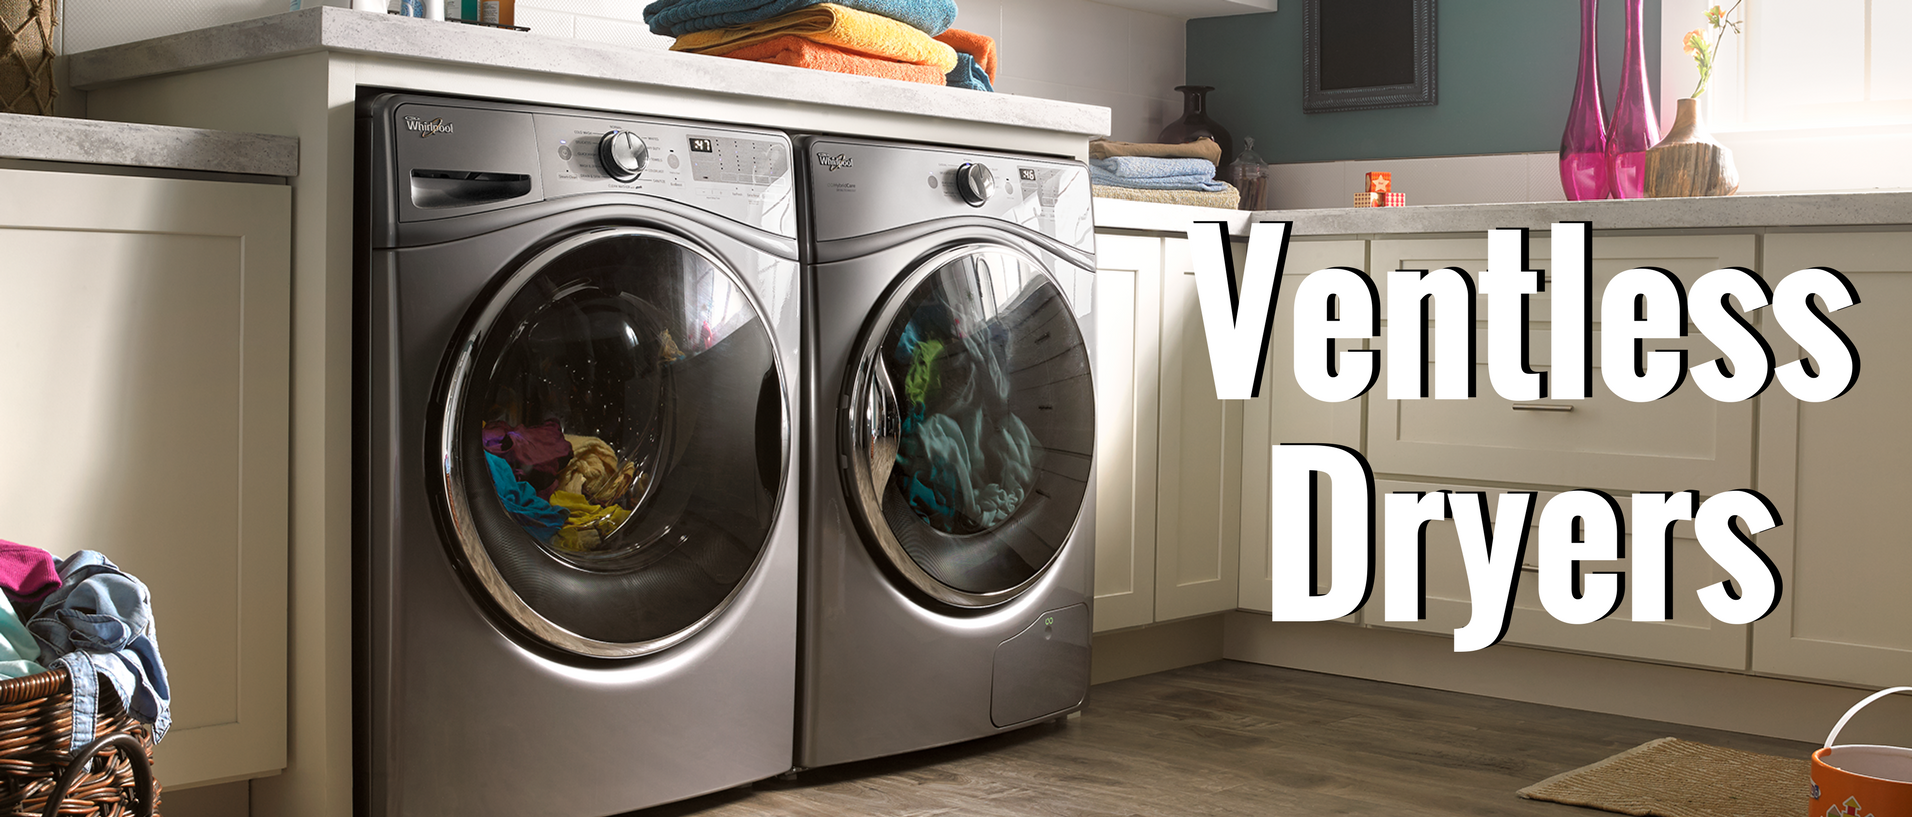 What Homemakers Should Know About Ventless Dryers